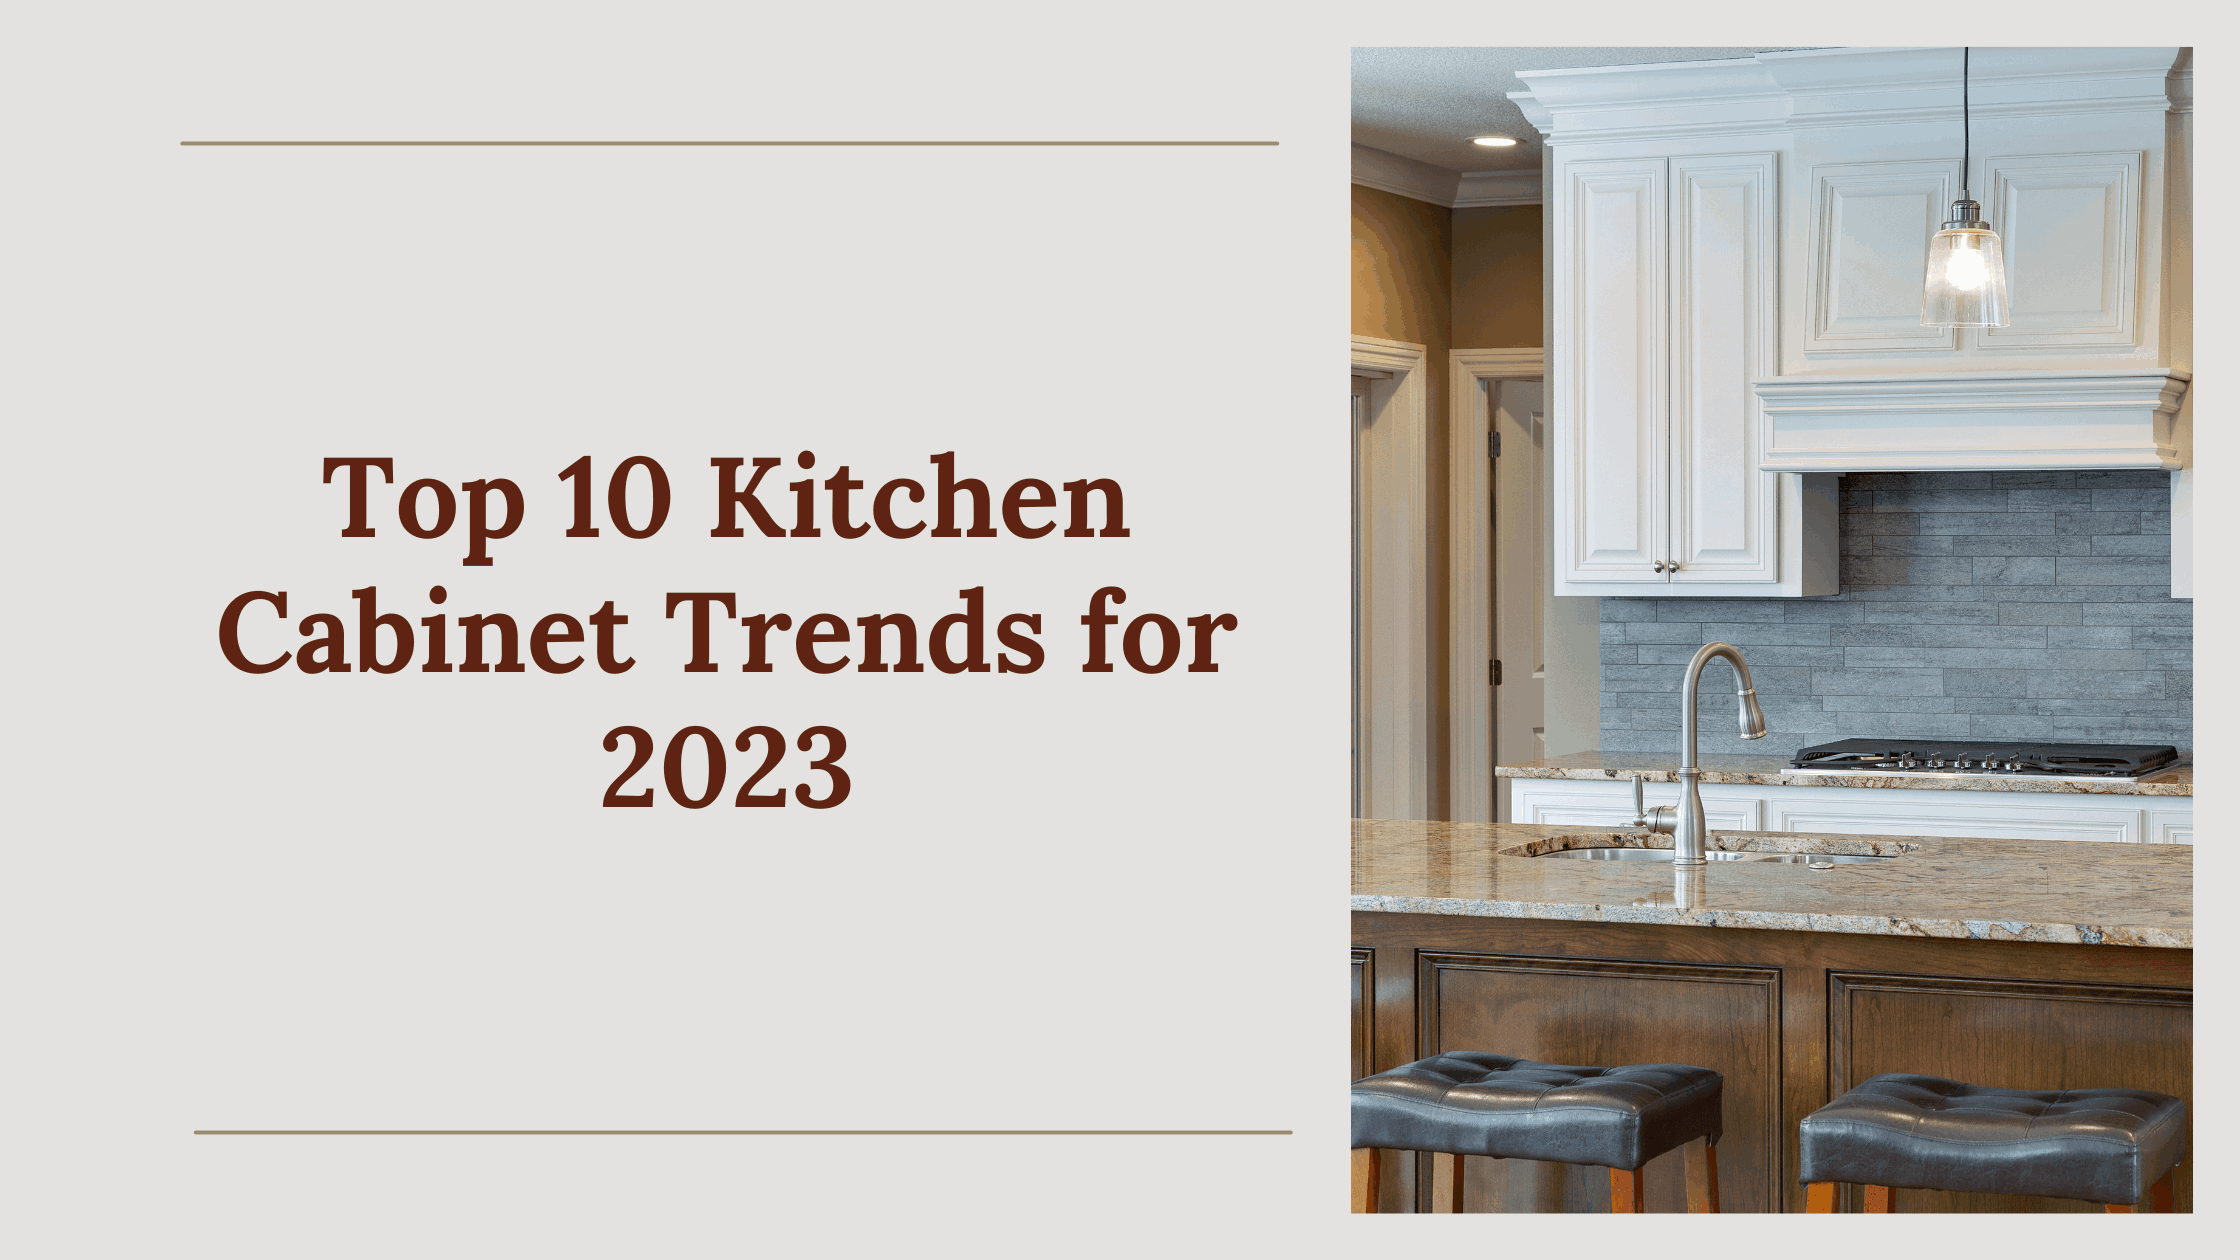 Cost of Kitchen Cabinets in 2023